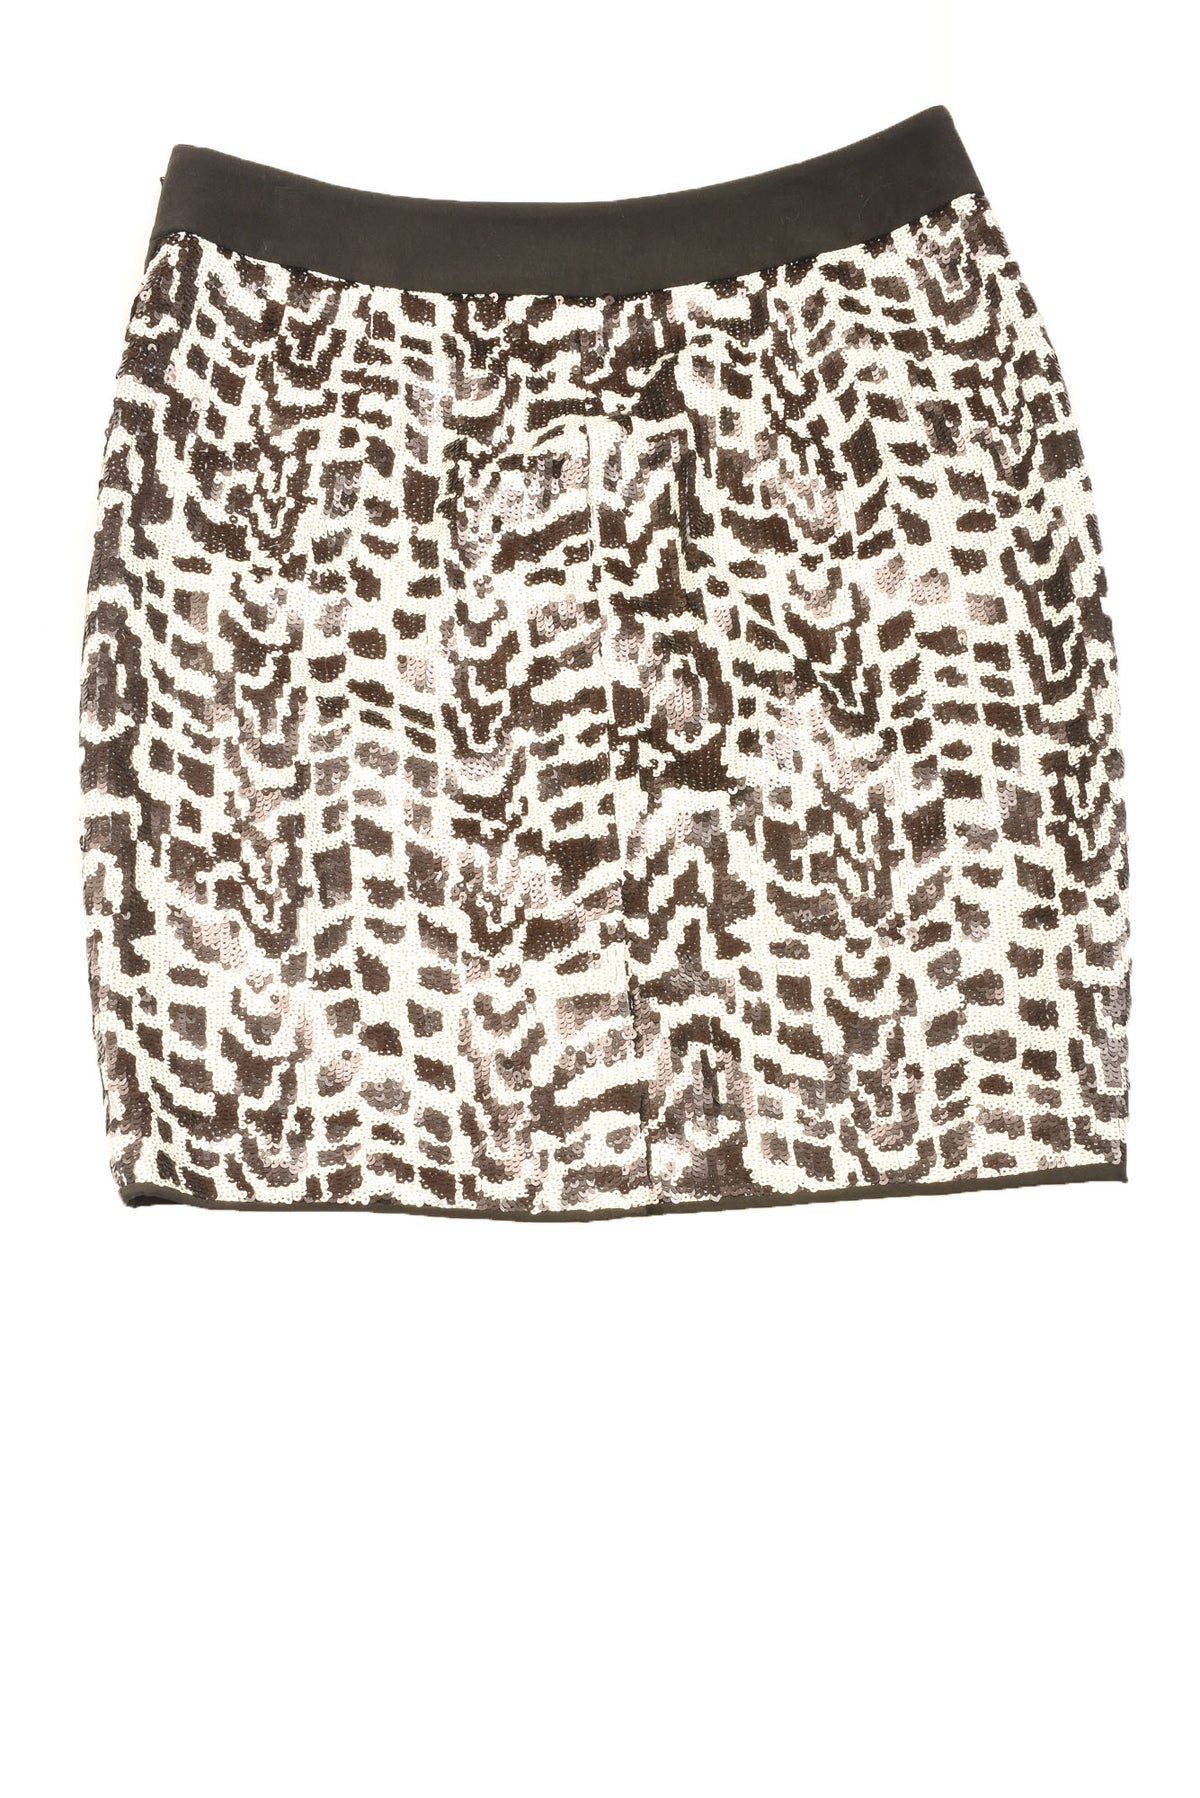 The limited Size 10 Women&#39;s Skirt